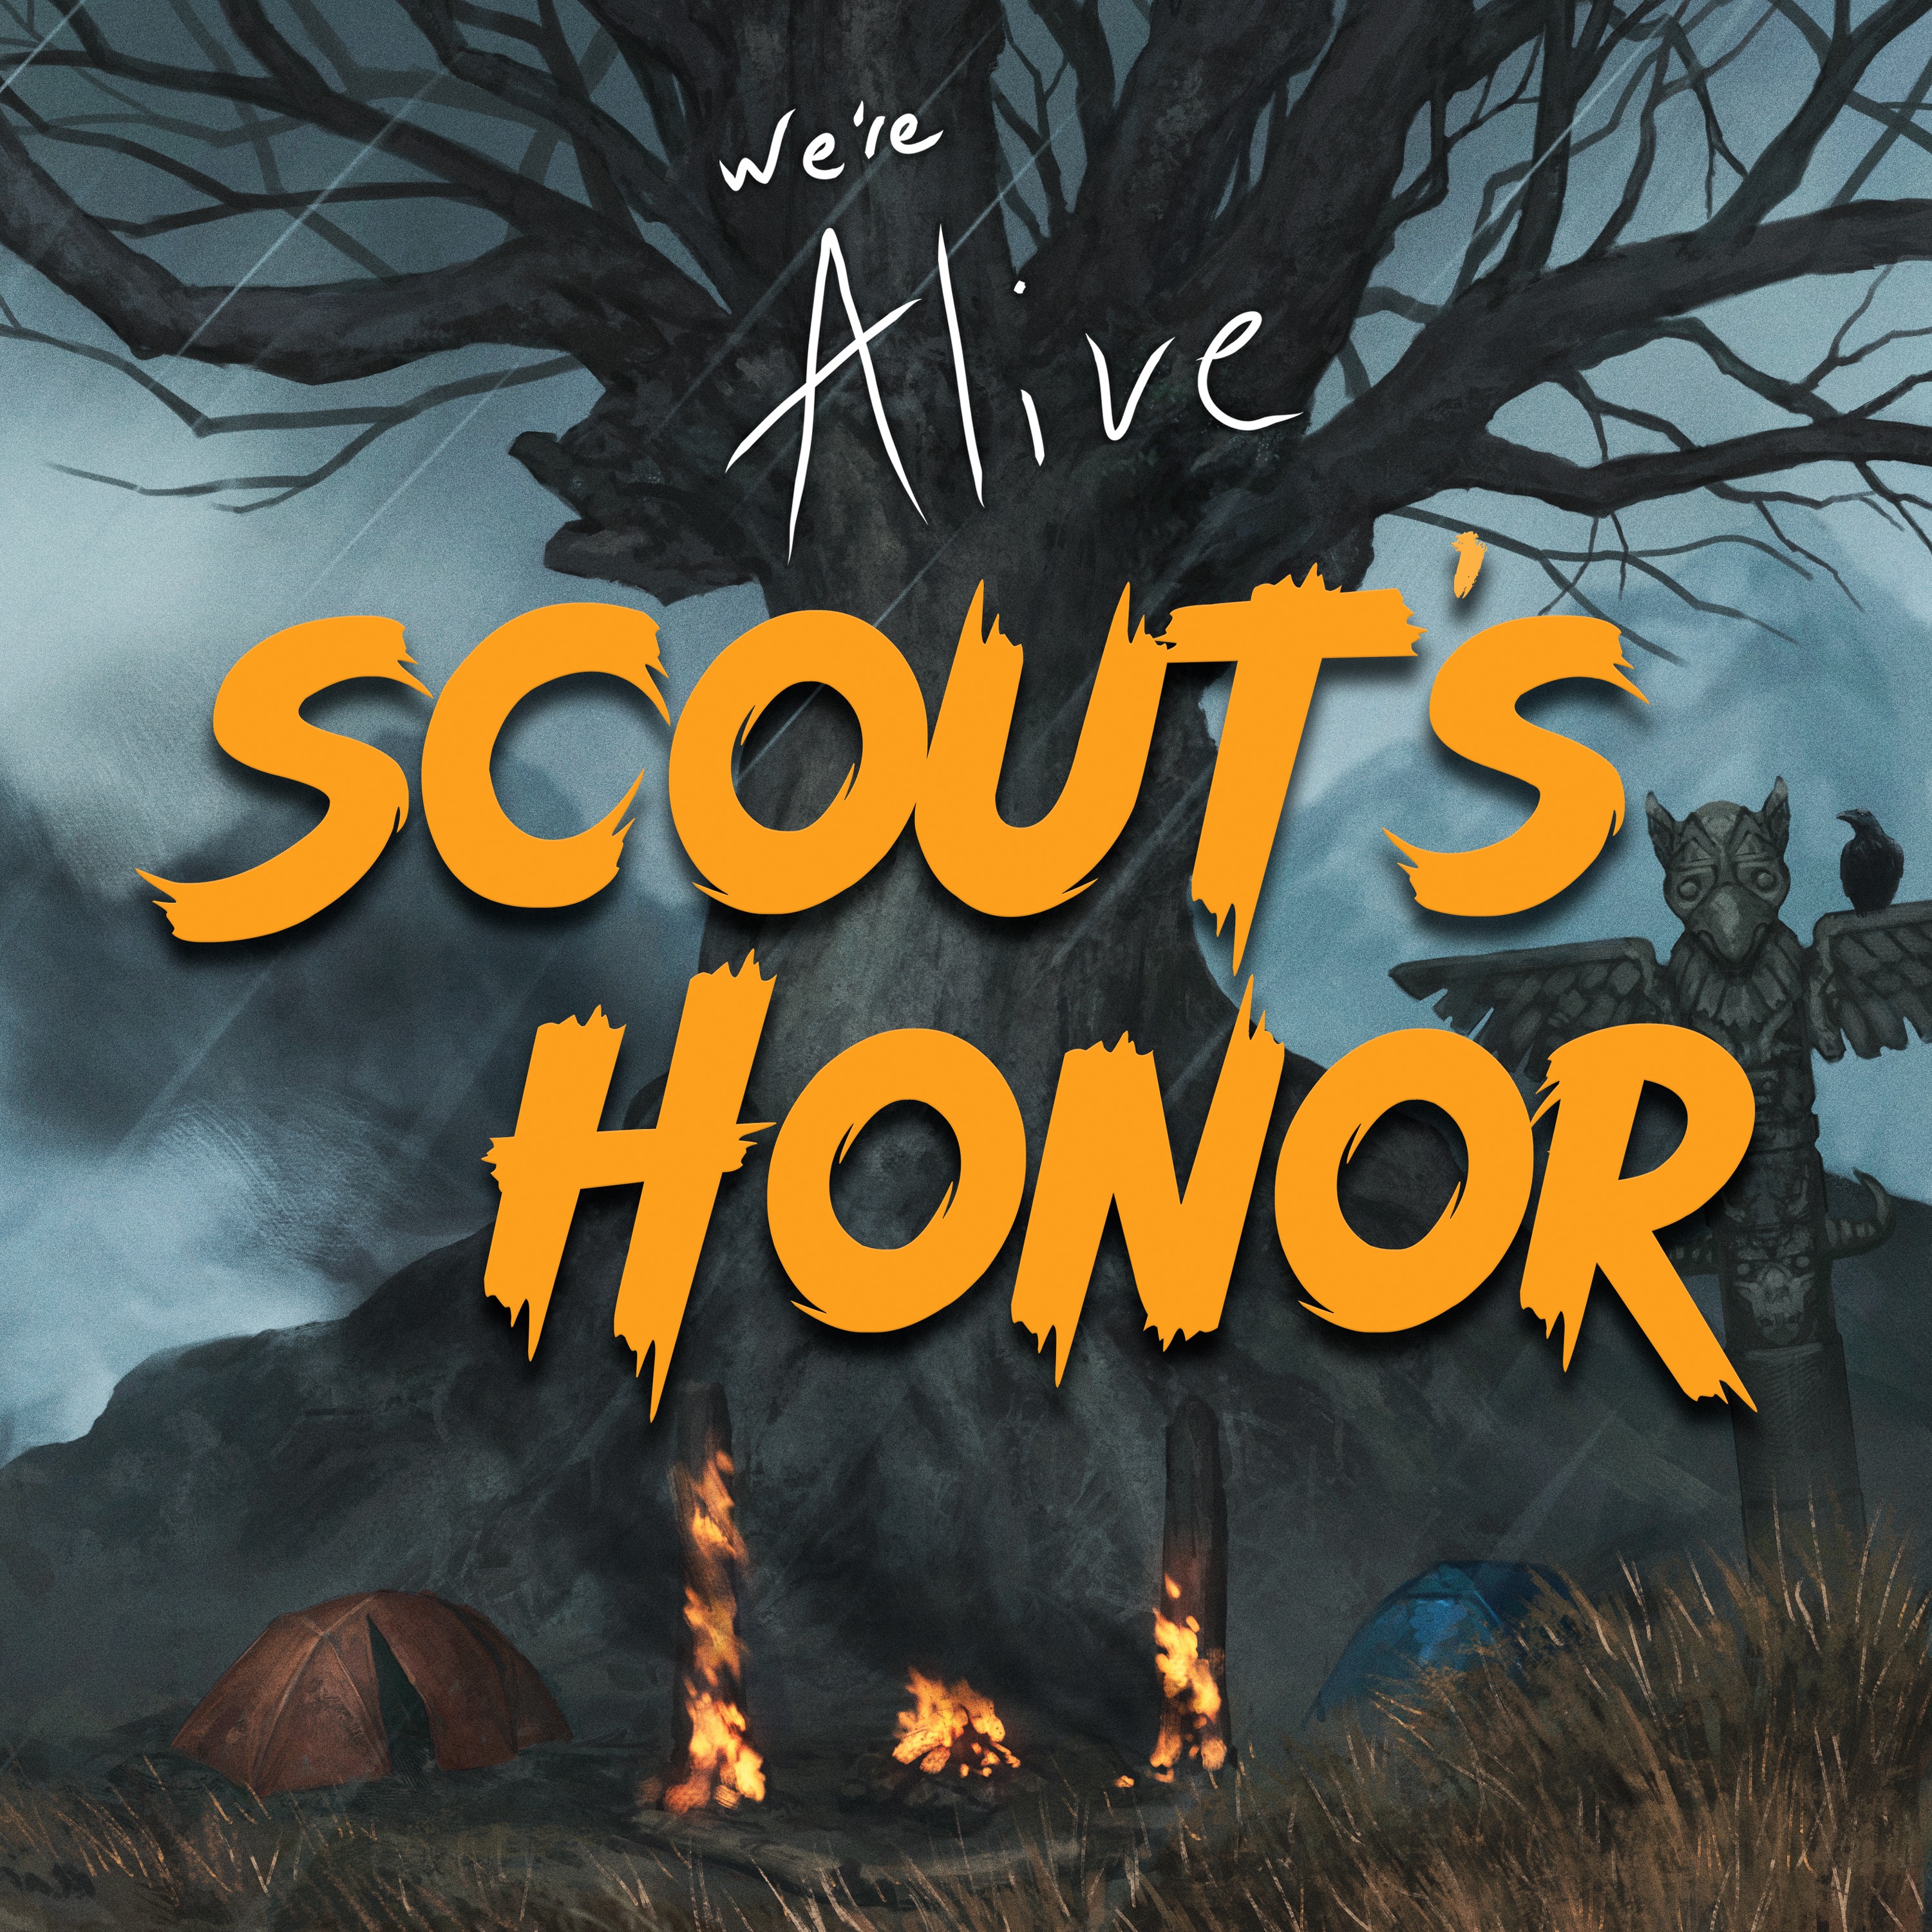 We’re Alive: Scout’s Honor - Chapter 4 - Make a Toast - Part 2 of 2